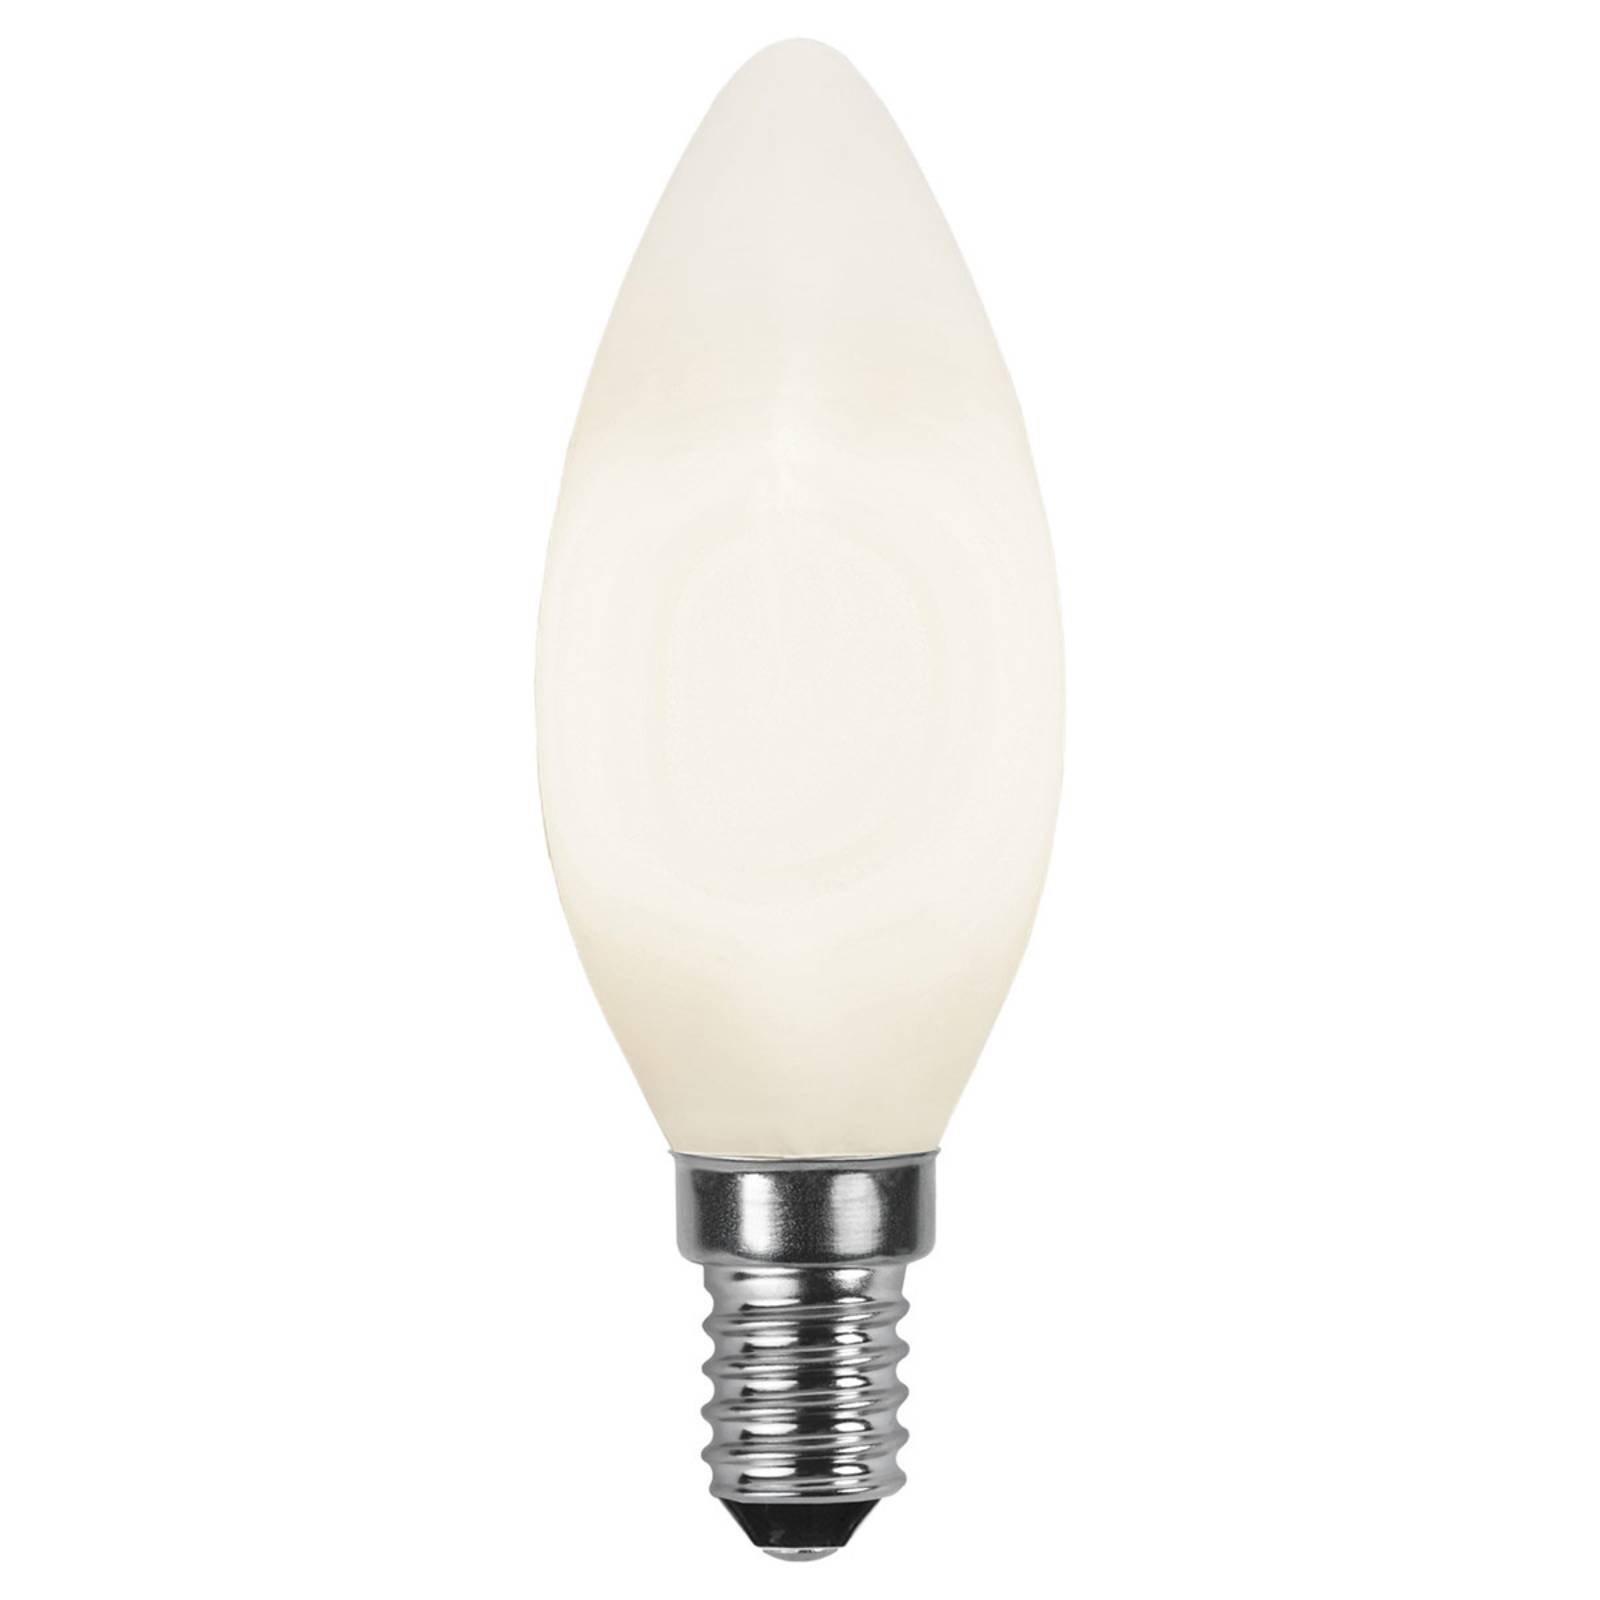 Image of STAR TRADING Ampoule bougie LED E14 2 700 K opale Ra90 3 W 7391482032157